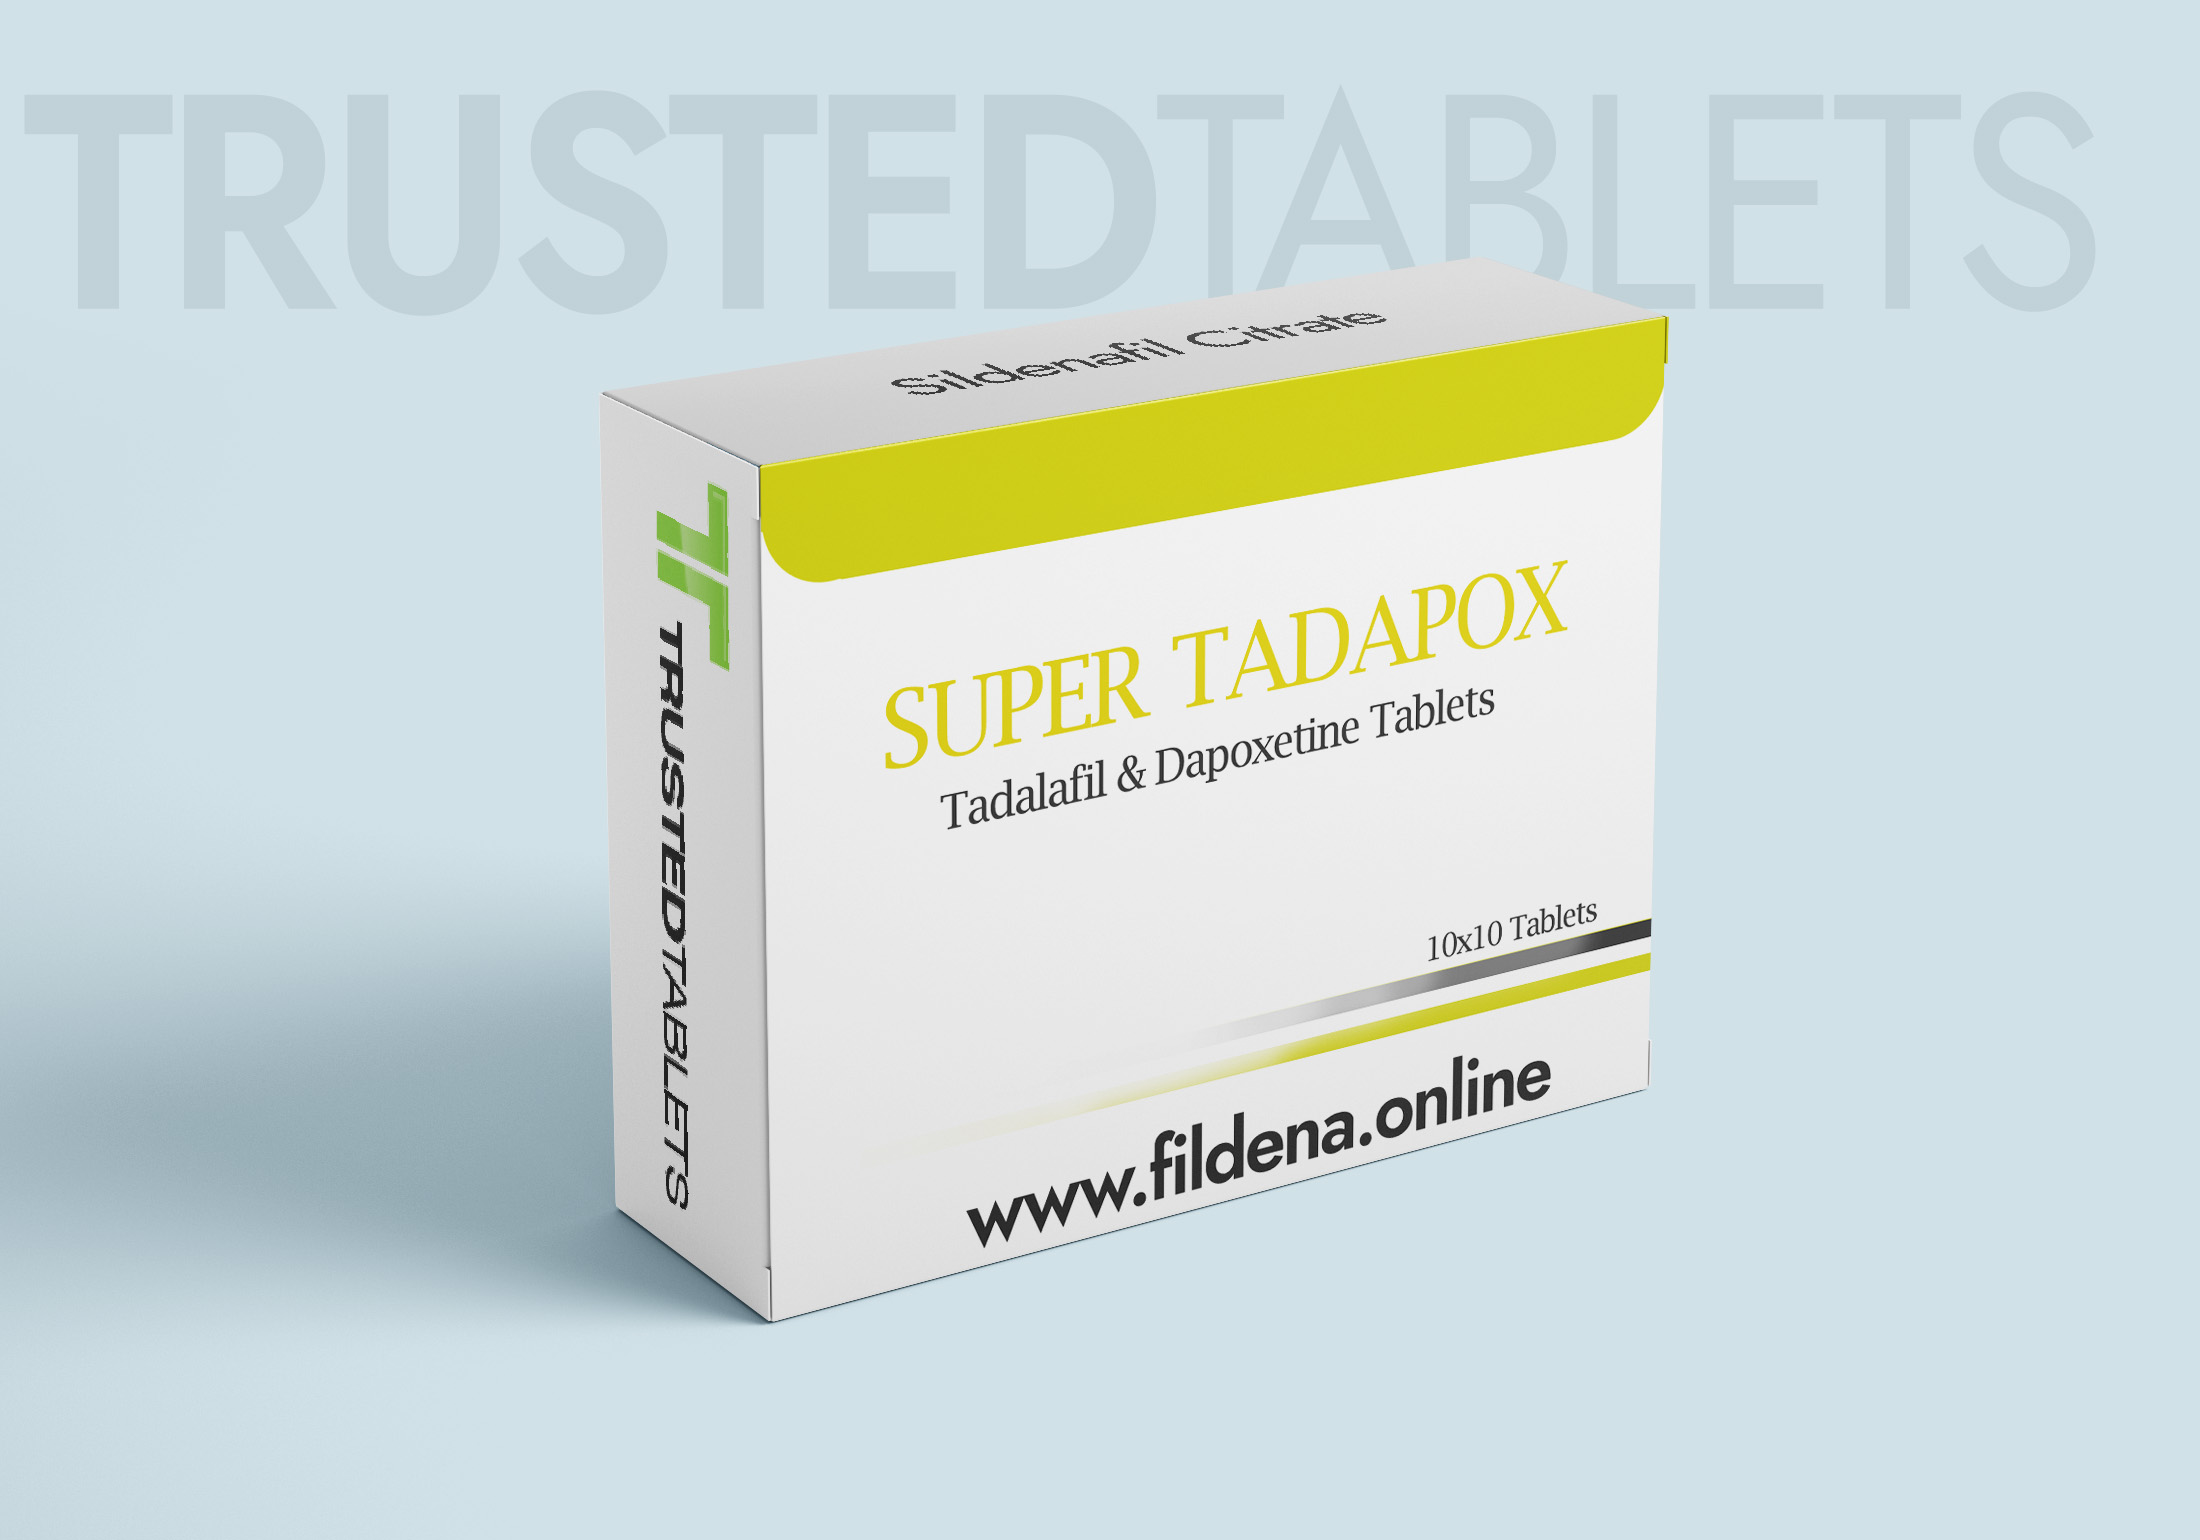 Super Tadapox TrustedTablets